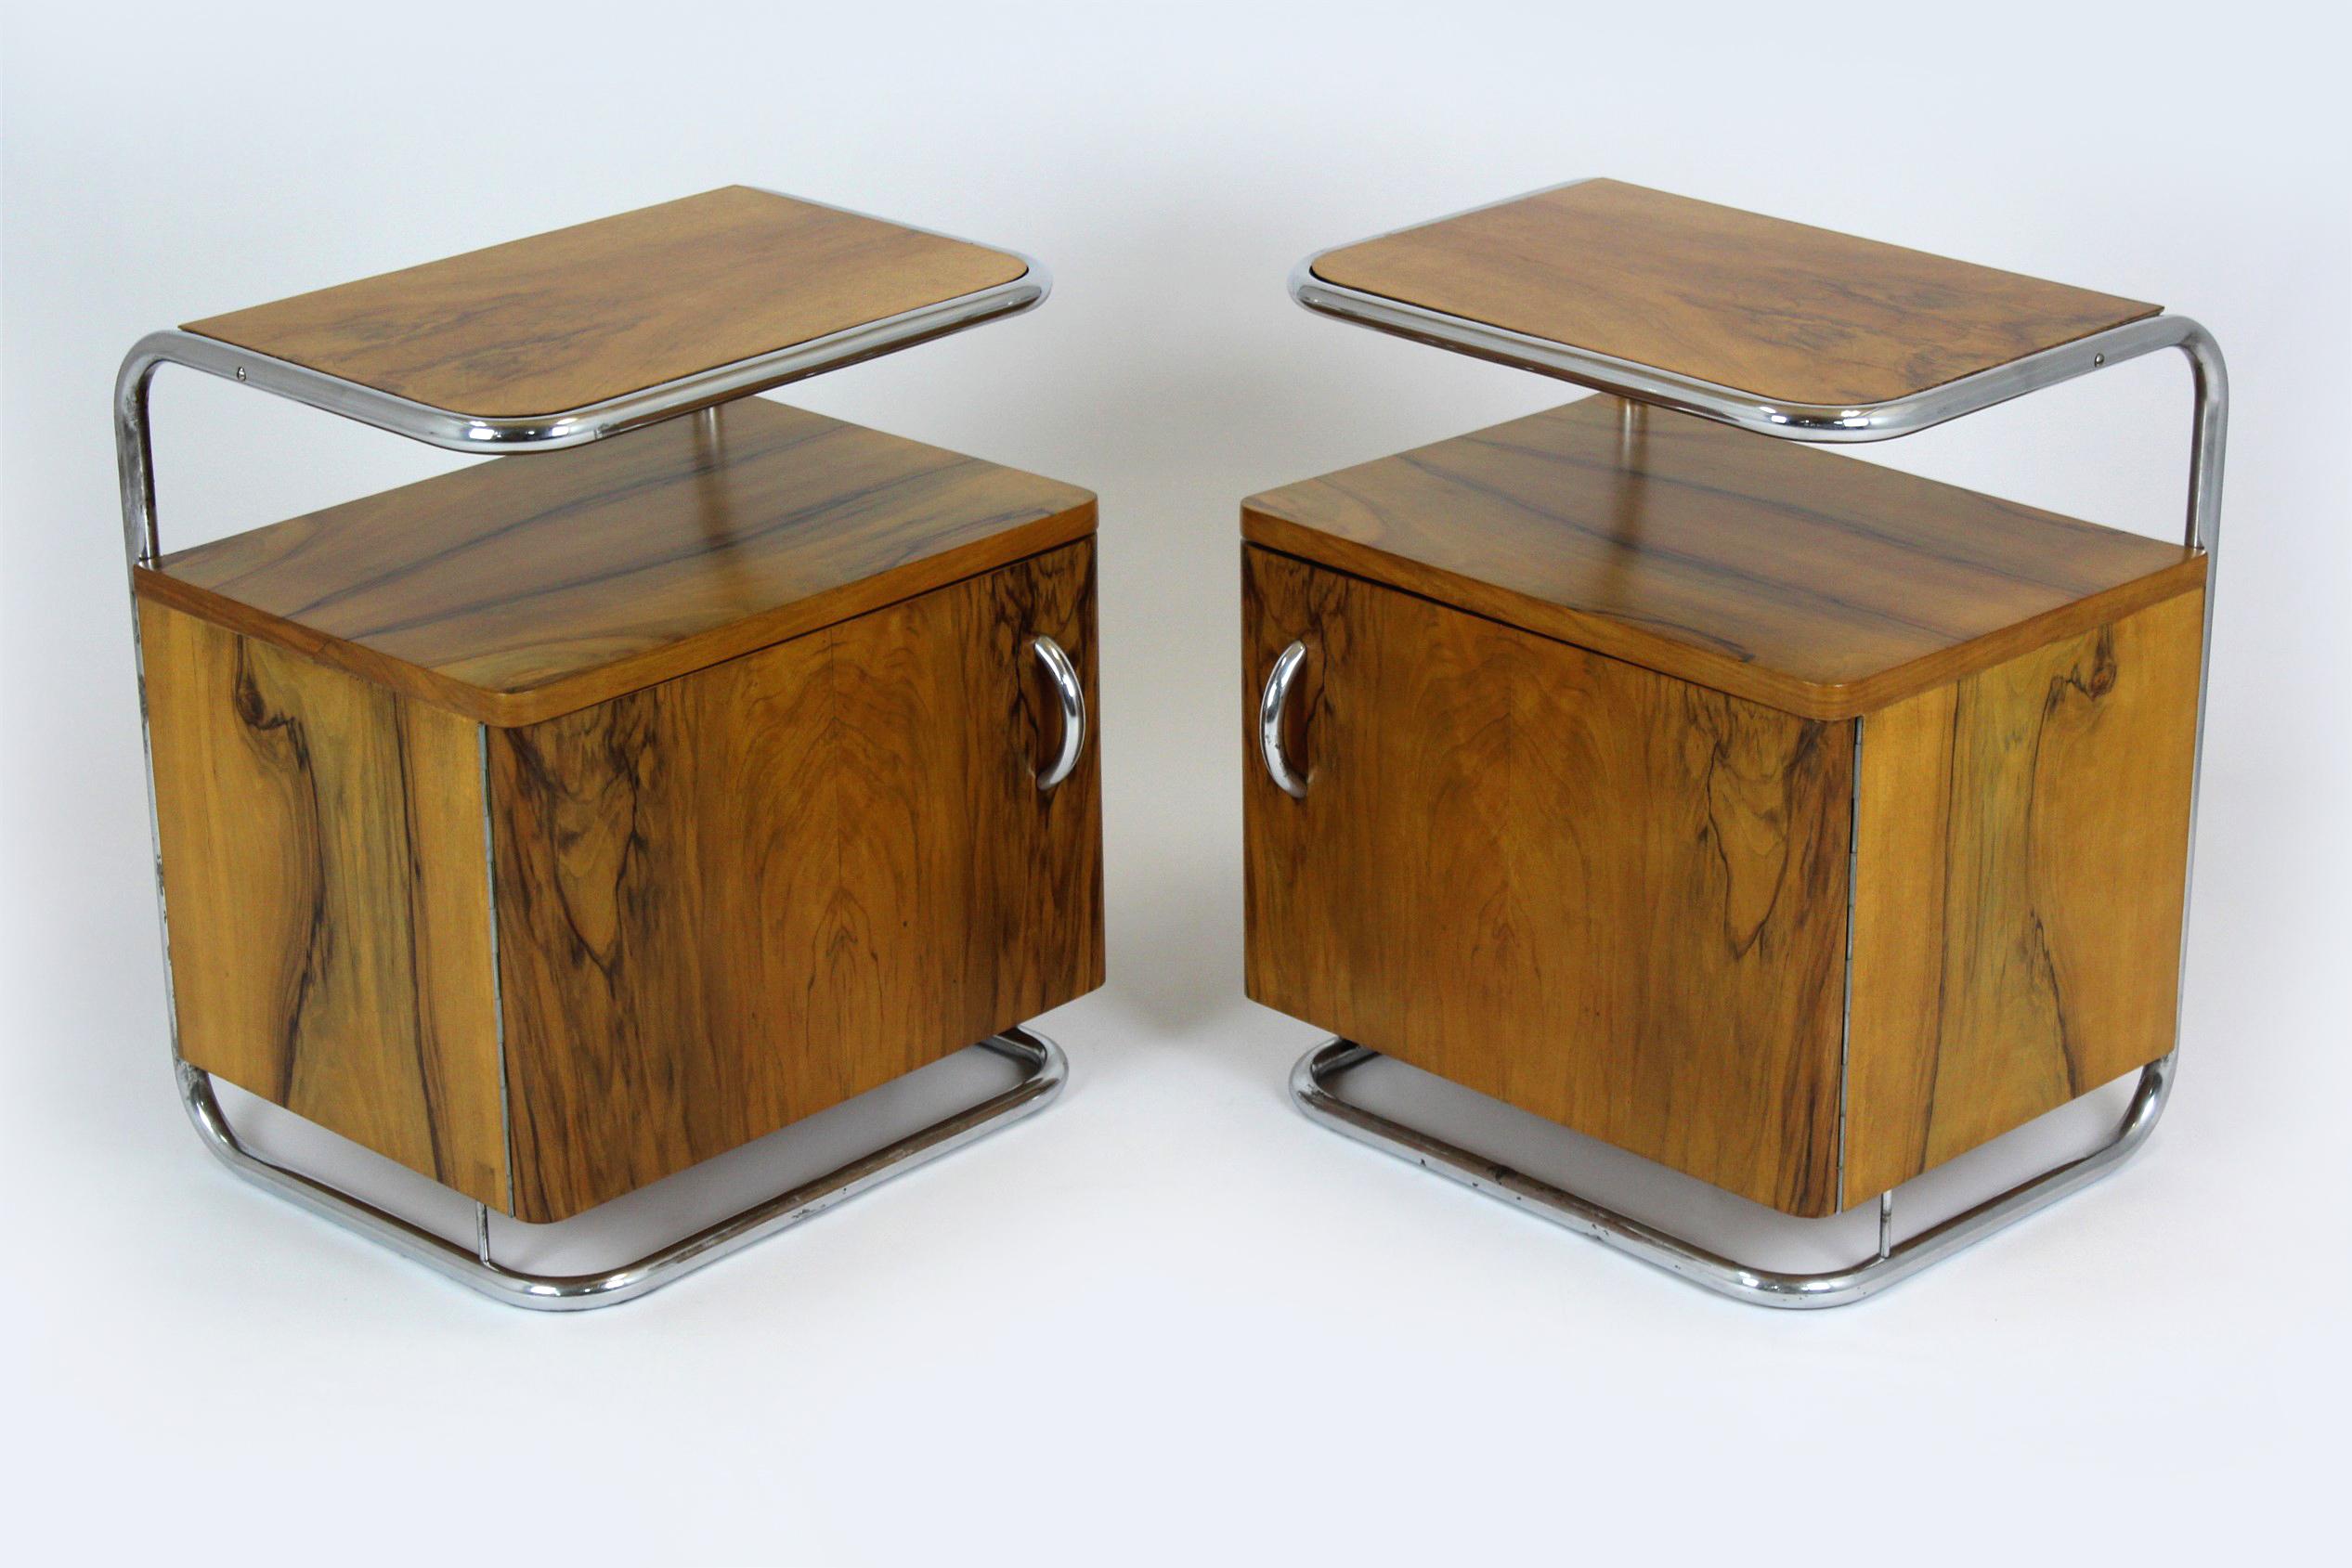 A pair of bauhaus style nightstands, made in the 1930s in Czechoslovakia. The frame is made of chrome tubular steel, the cabinets are walnut. The tables have been restored, the wood is varnished in a satin finish. Chrome elements are preserved in